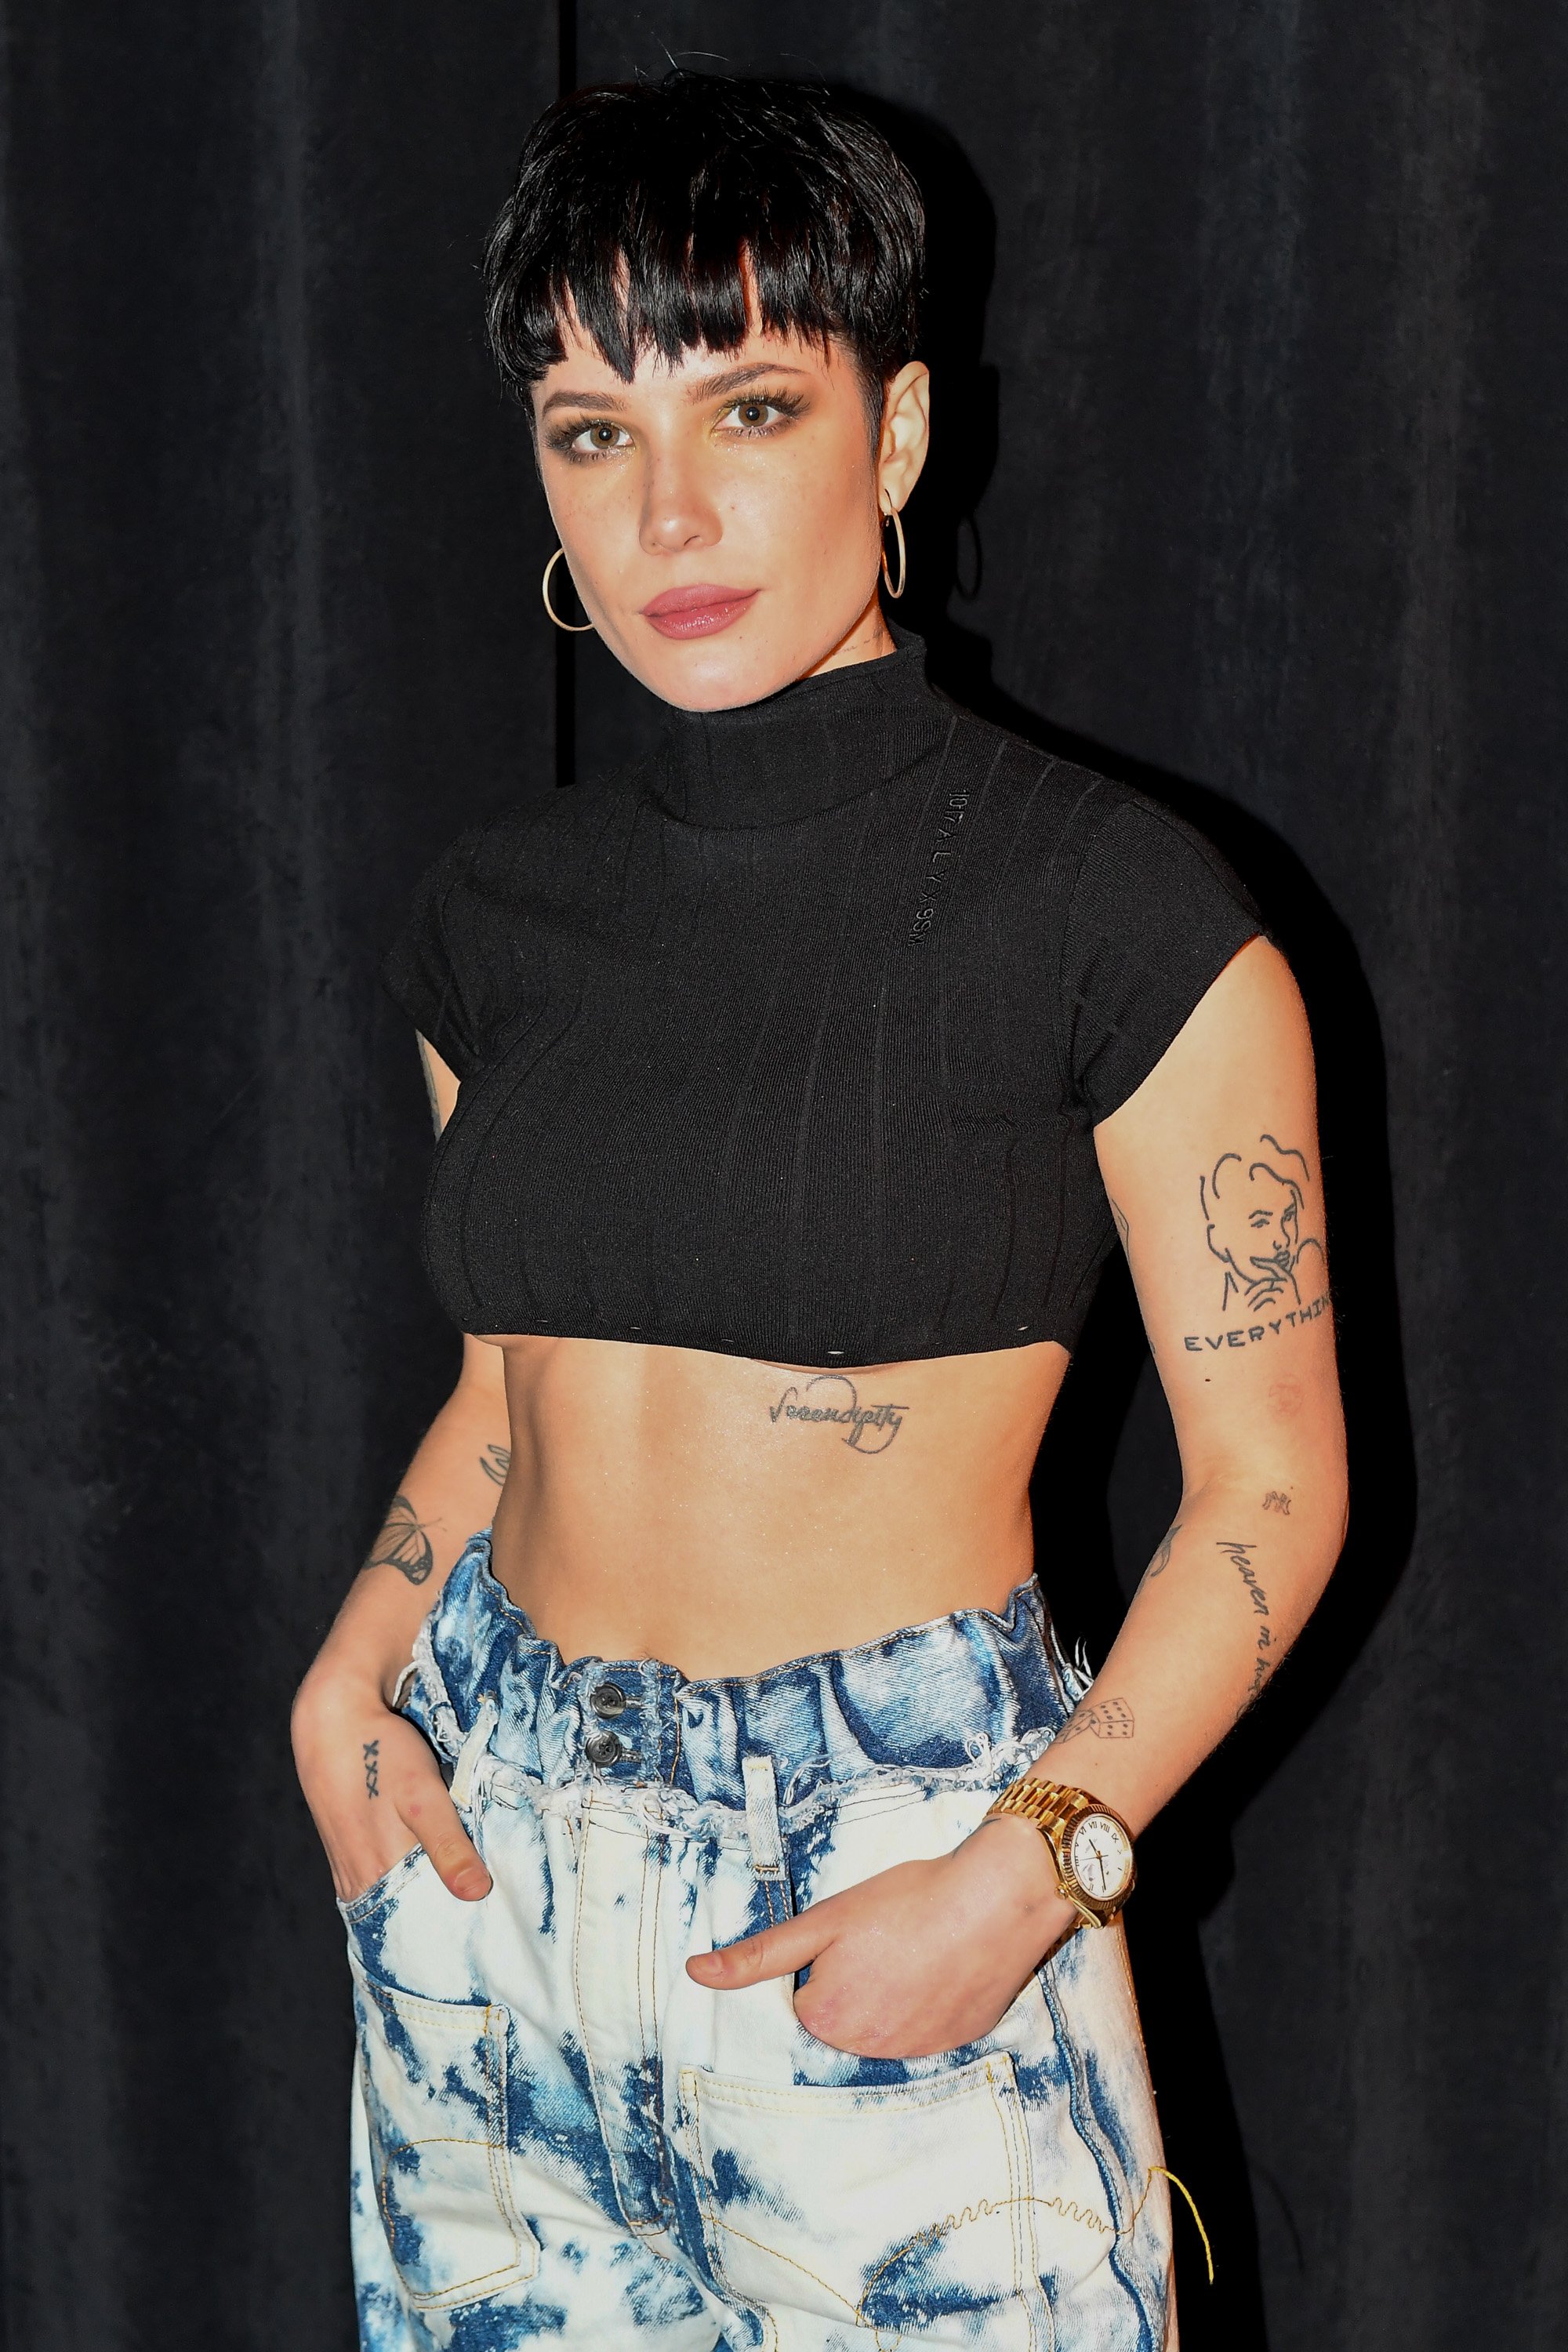 Halsey attends a Los Angeles Lakers versus Cleveland Cavaliers basketball game. Source | Photo: Getty Images